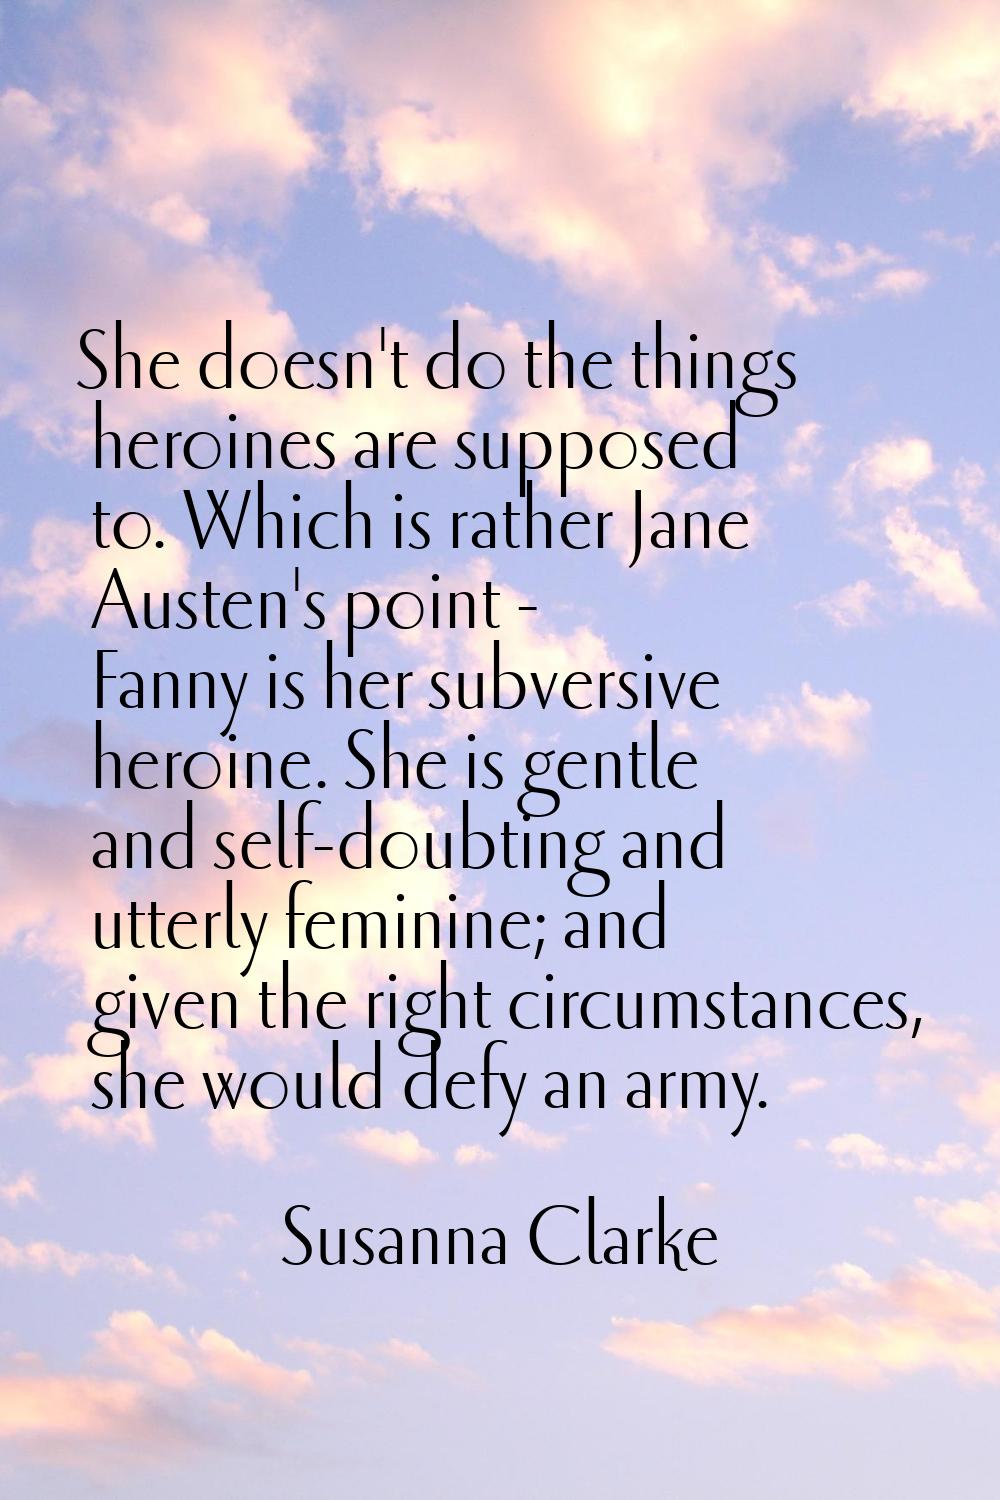 She doesn't do the things heroines are supposed to. Which is rather Jane Austen's point - Fanny is 